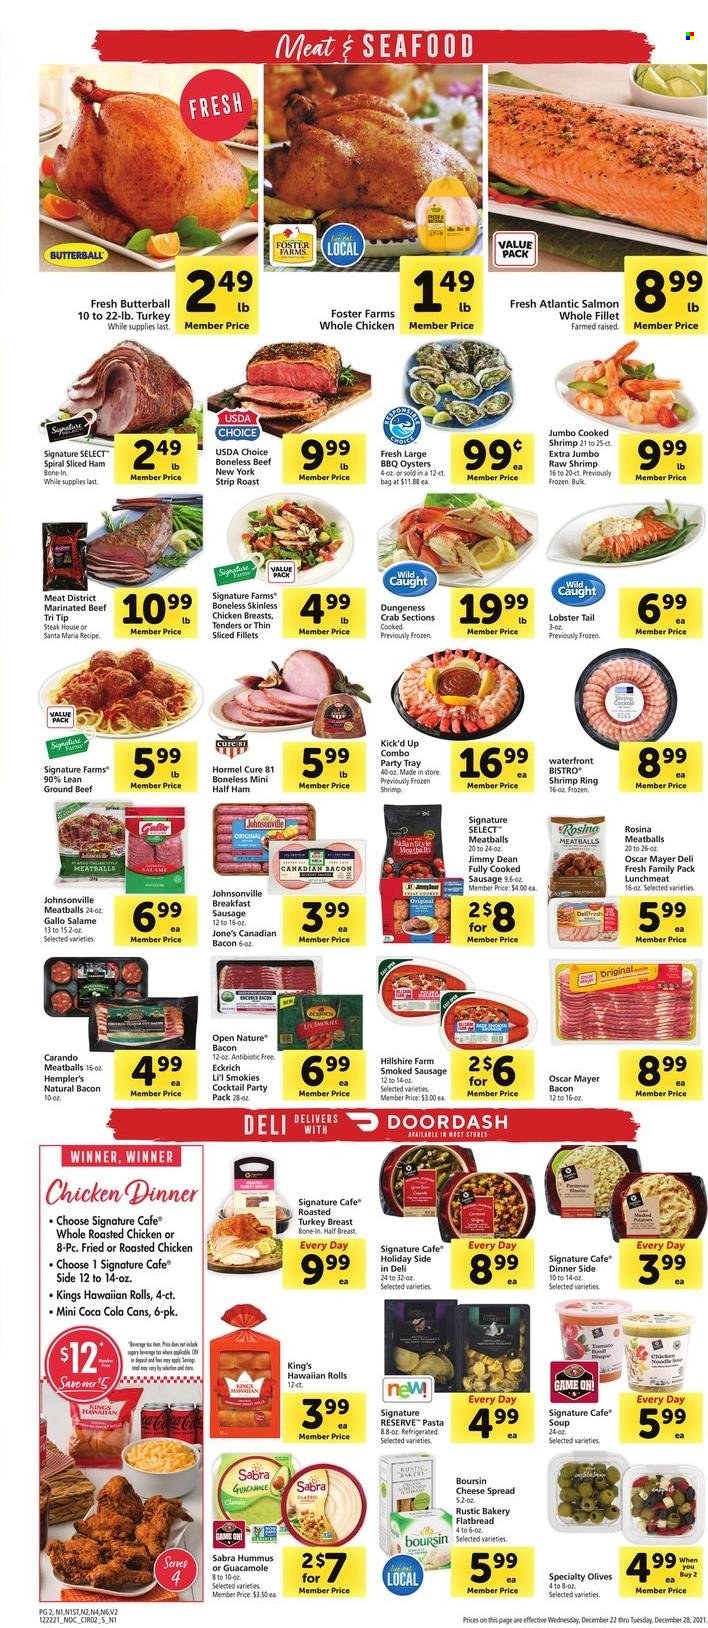 thumbnail - Safeway Flyer - 12/22/2021 - 12/28/2021 - Sales products - flatbread, hawaiian rolls, Butterball, whole chicken, chicken breasts, beef meat, ground beef, steak, marinated beef, Johnsonville, lobster, salmon, oysters, seafood, crab, lobster tail, shrimps, chicken roast, meatballs, soup, pasta, noodles, Jimmy Dean, Hormel, bacon, canadian bacon, half ham, ham, Hillshire Farm, Oscar Mayer, sausage, smoked sausage, lunch meat, olives, guacamole, Coca-Cola, bag. Page 4.